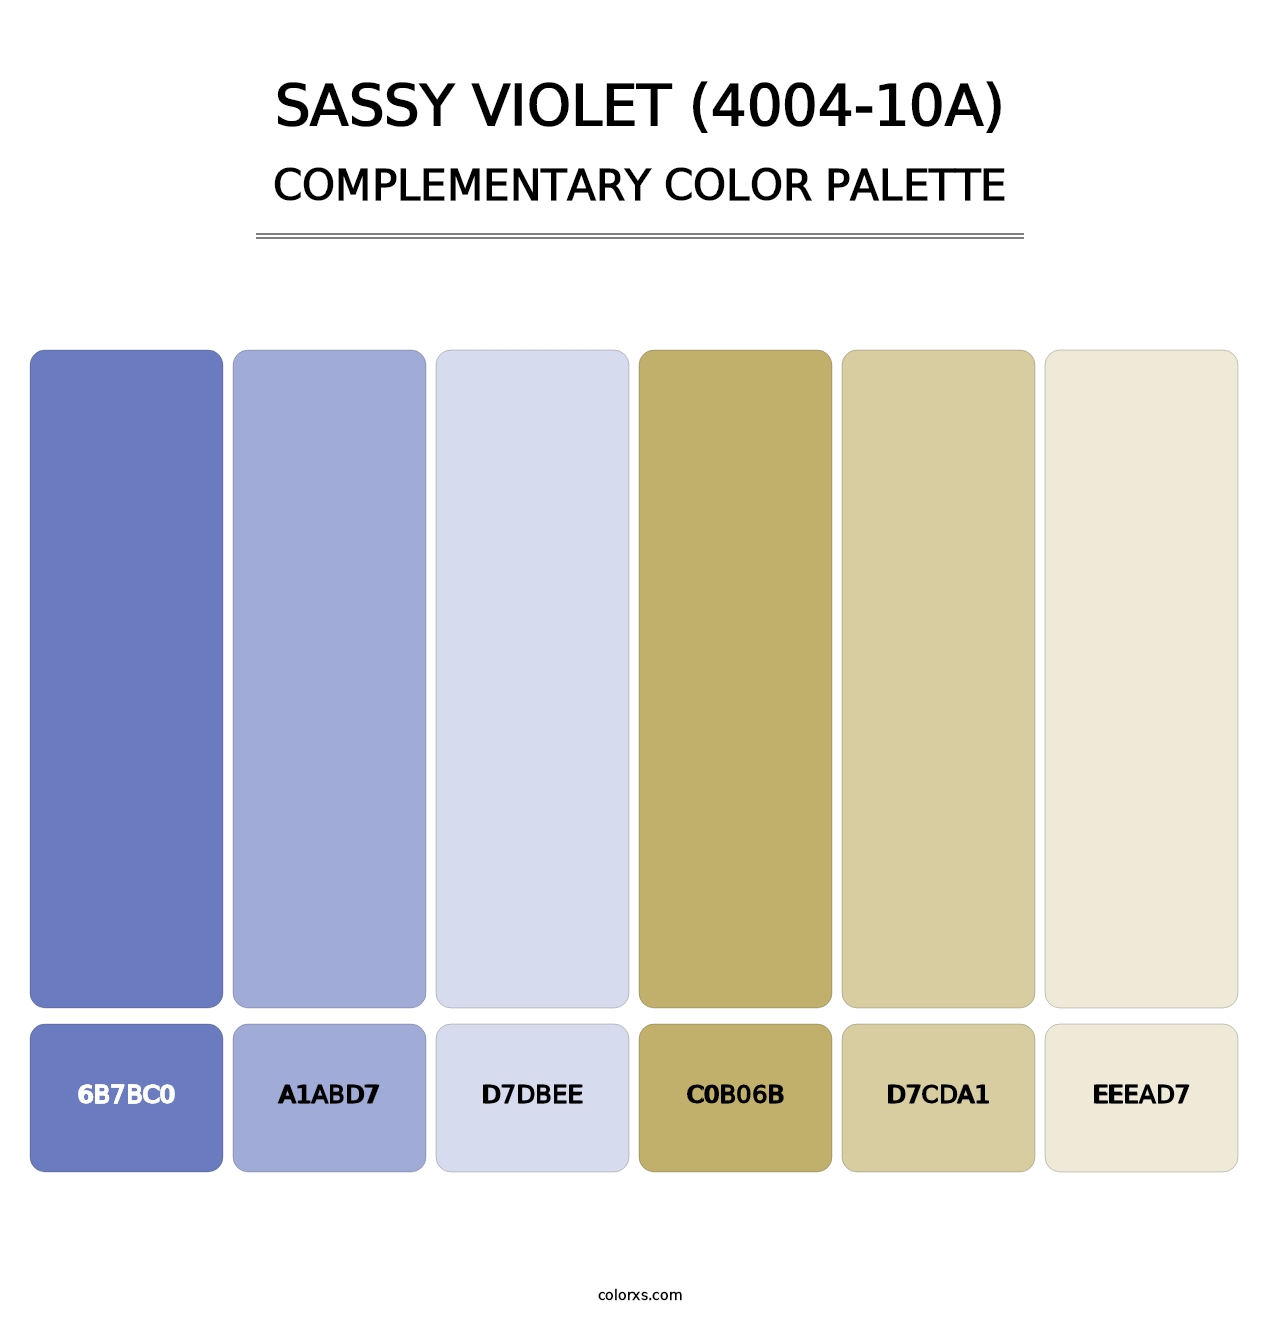 Sassy Violet (4004-10A) - Complementary Color Palette